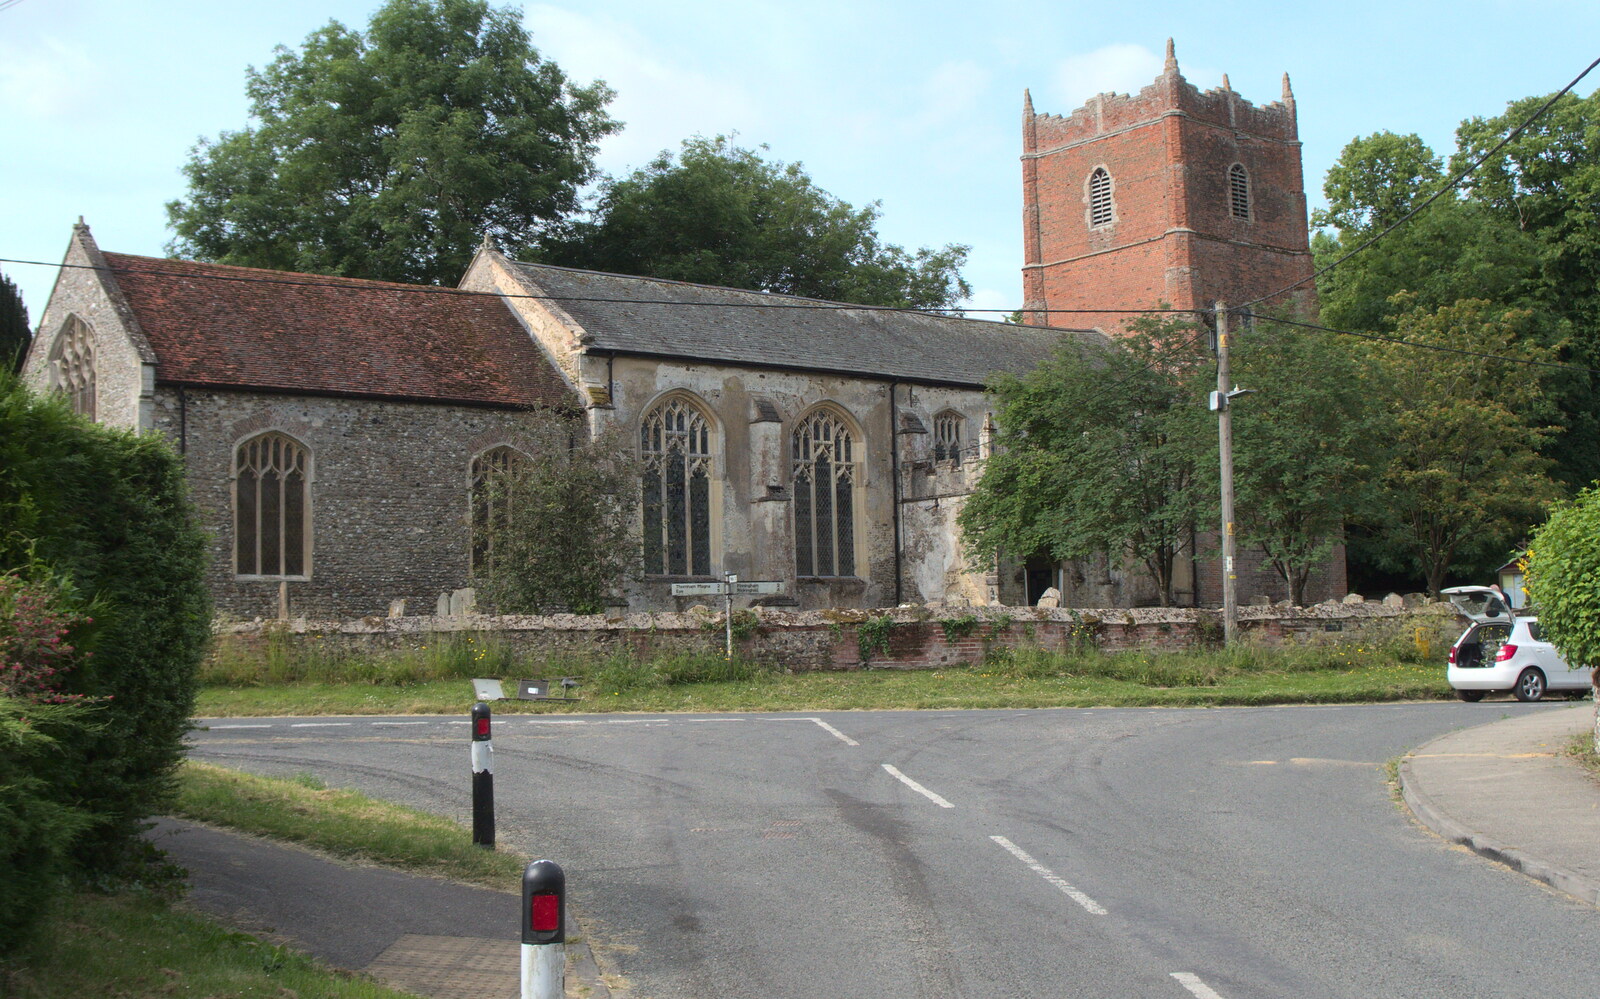 St. Mary the Virgin at Gislingham from A BSCC Ride to Pulham Market, Norfolk - 17th June 2021